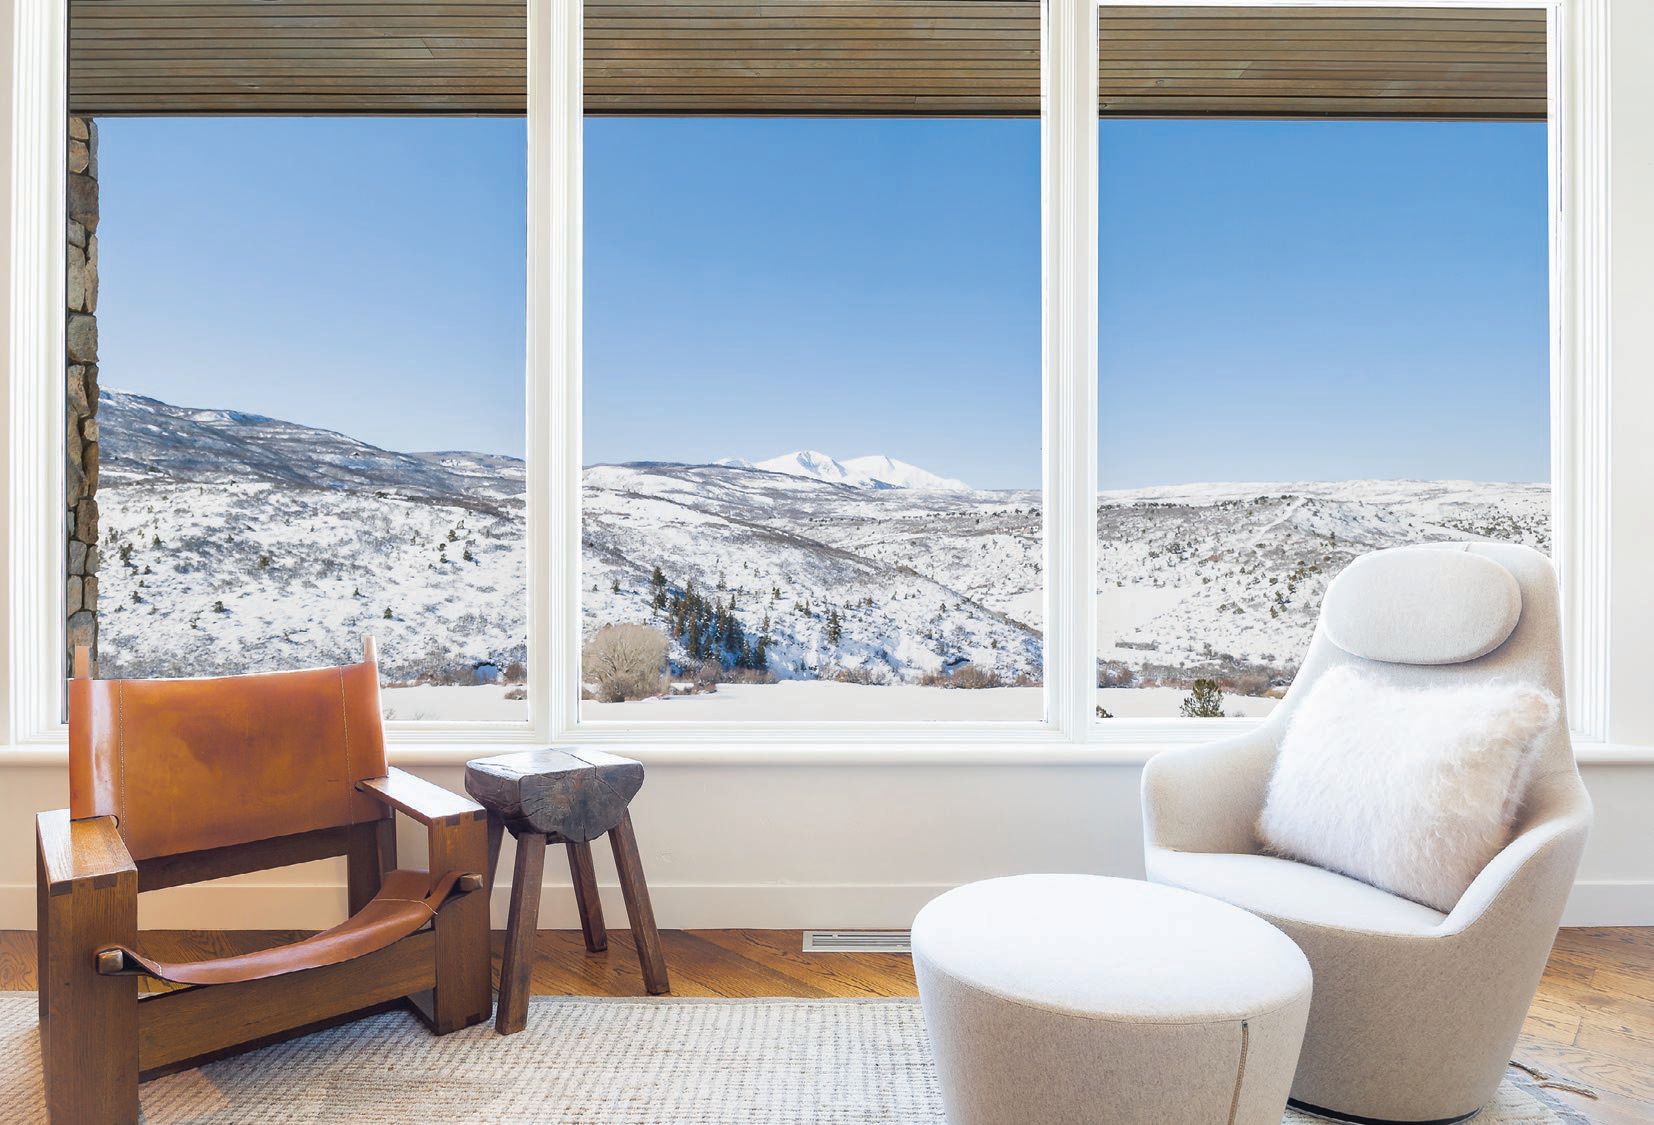 Seating area with views of iconic Mt. Sopris featuring a high-back armchair and ottoman from B&B Italia and vintage lounge chair from Nickey Kehoe PHOTOGRAPHED BY SAM FERGUSON